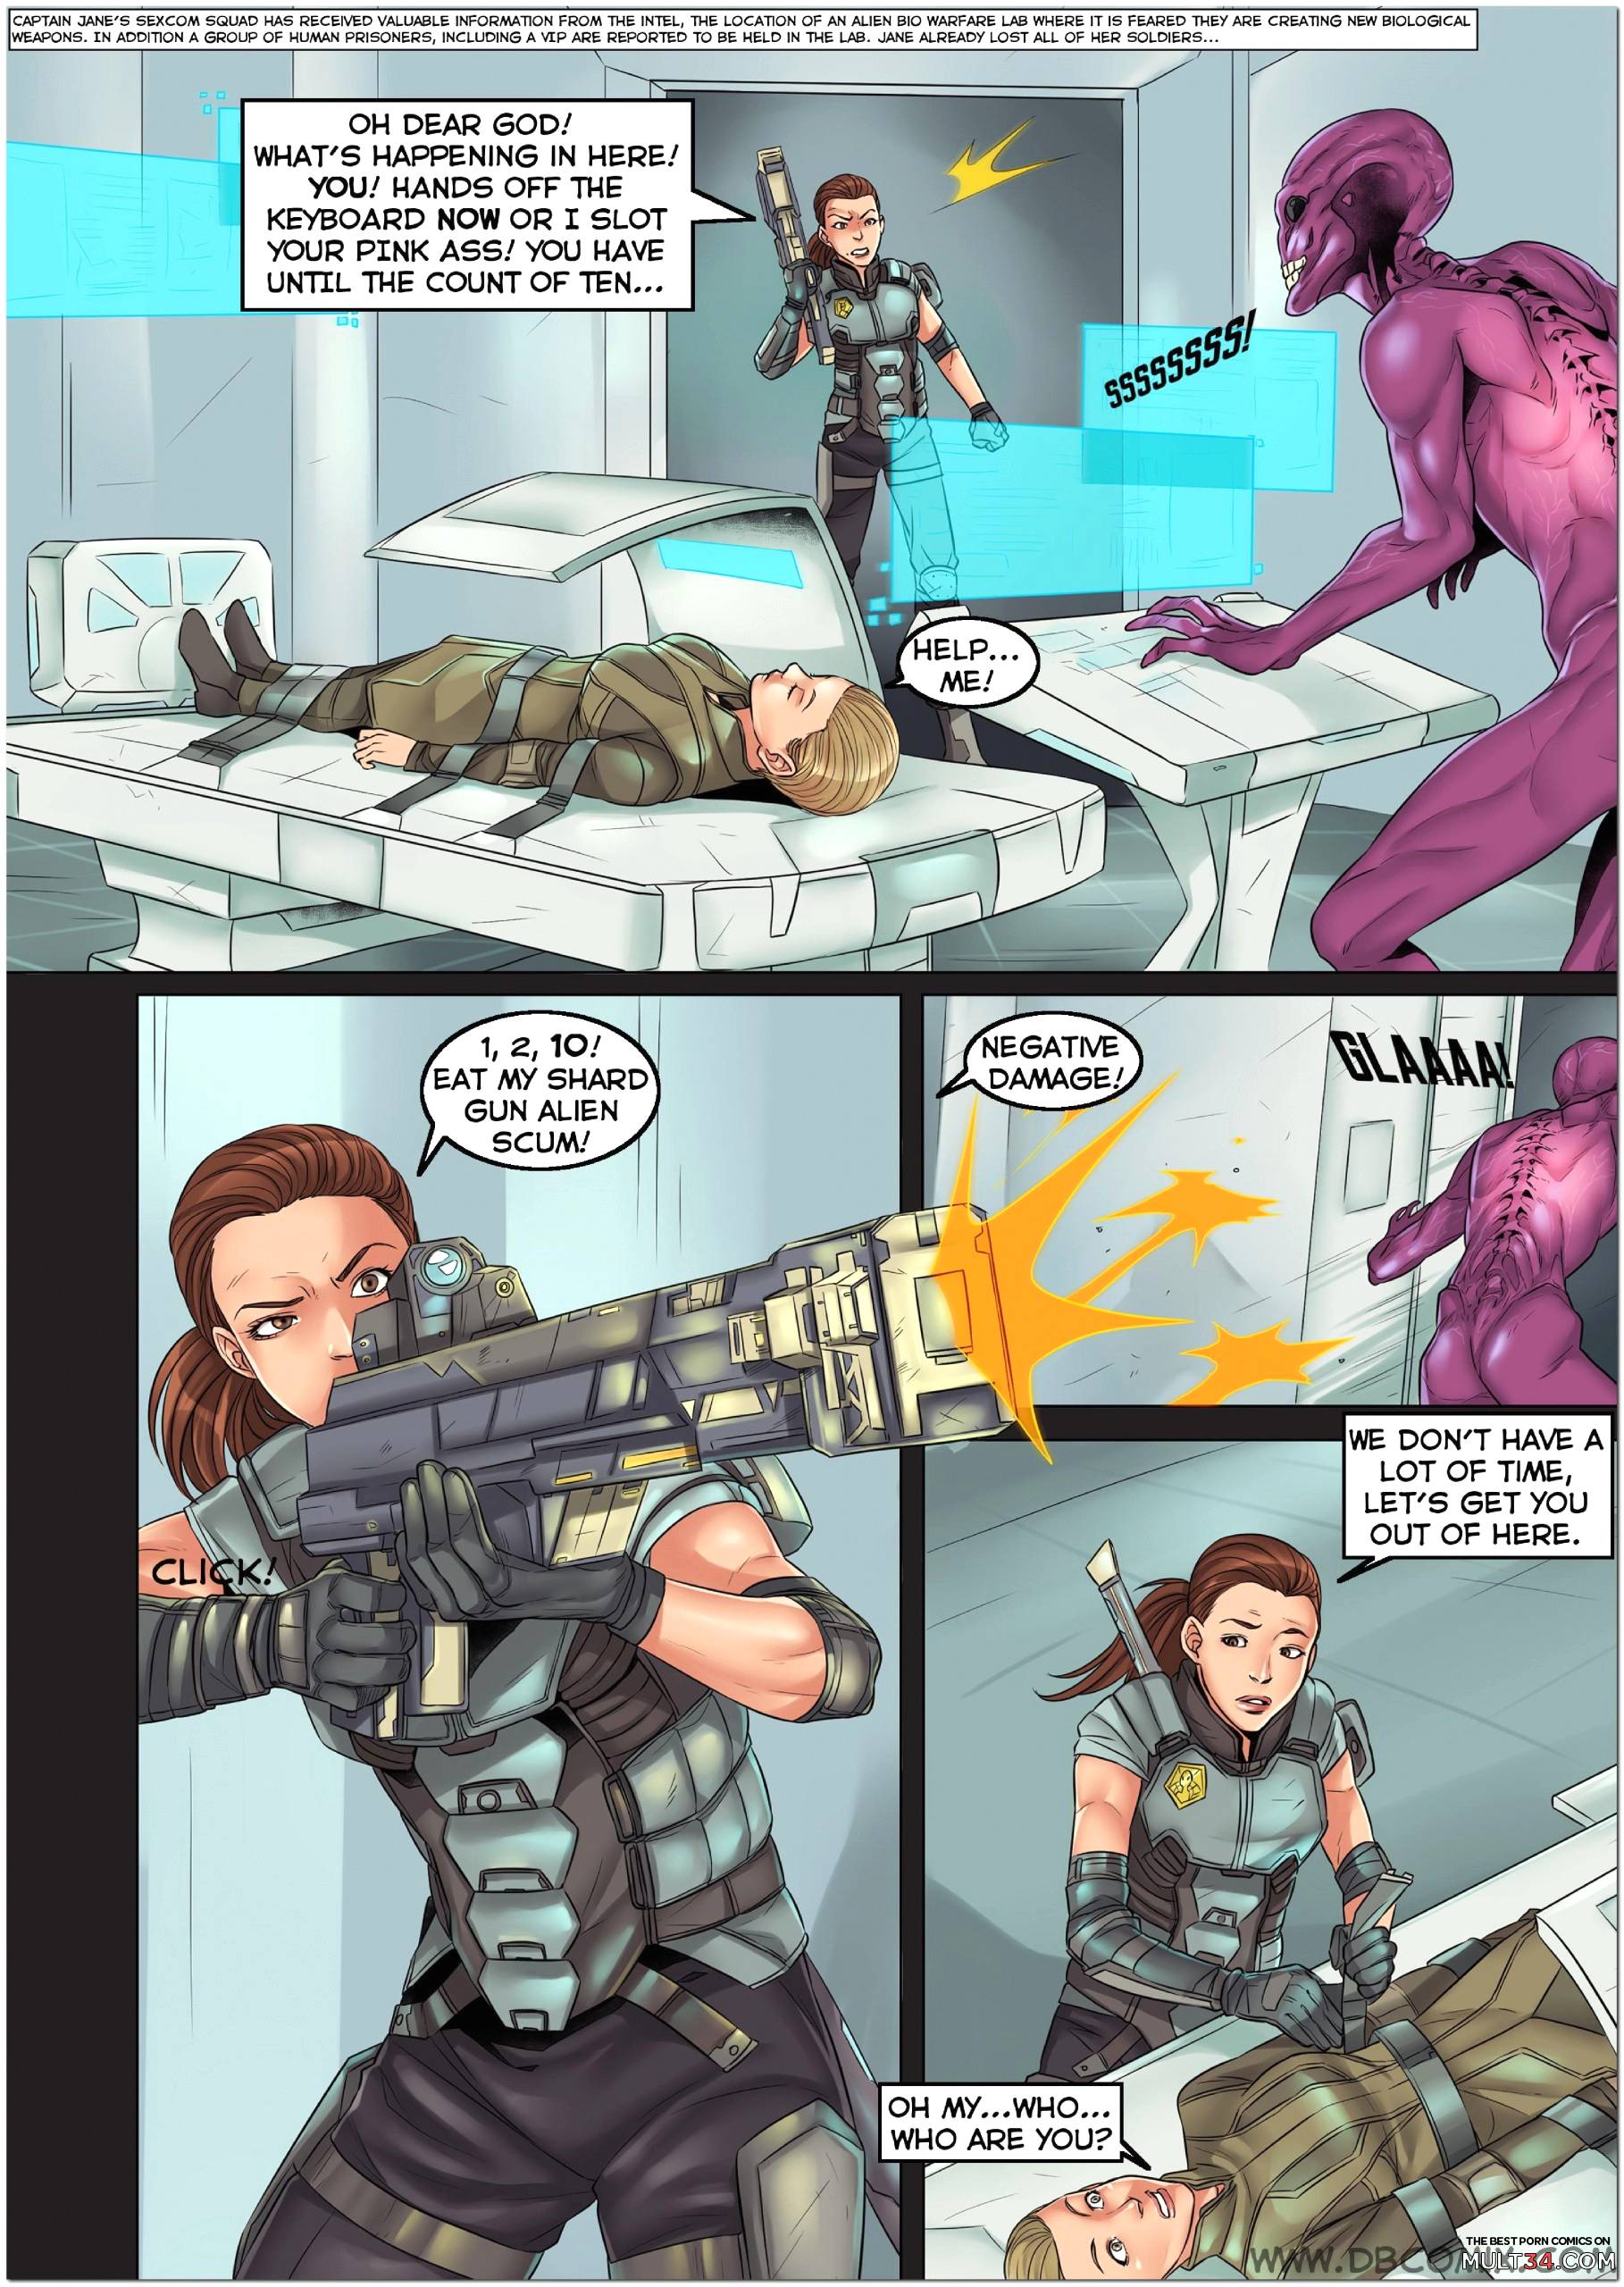 seXCOM - Terror from the deep page 2